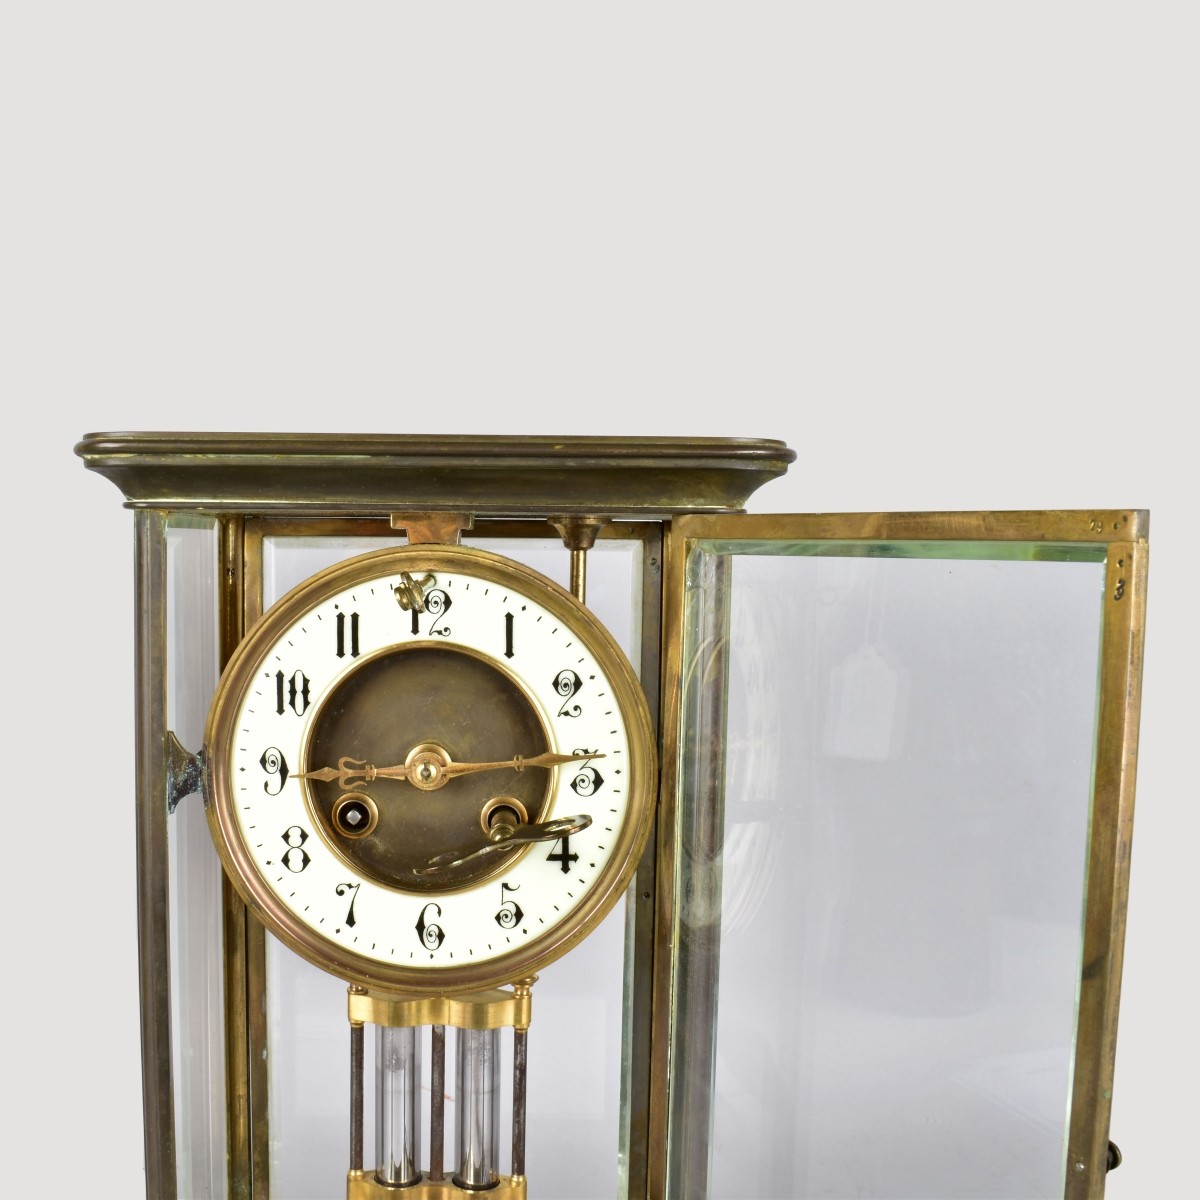 Antique French Mantle Clock